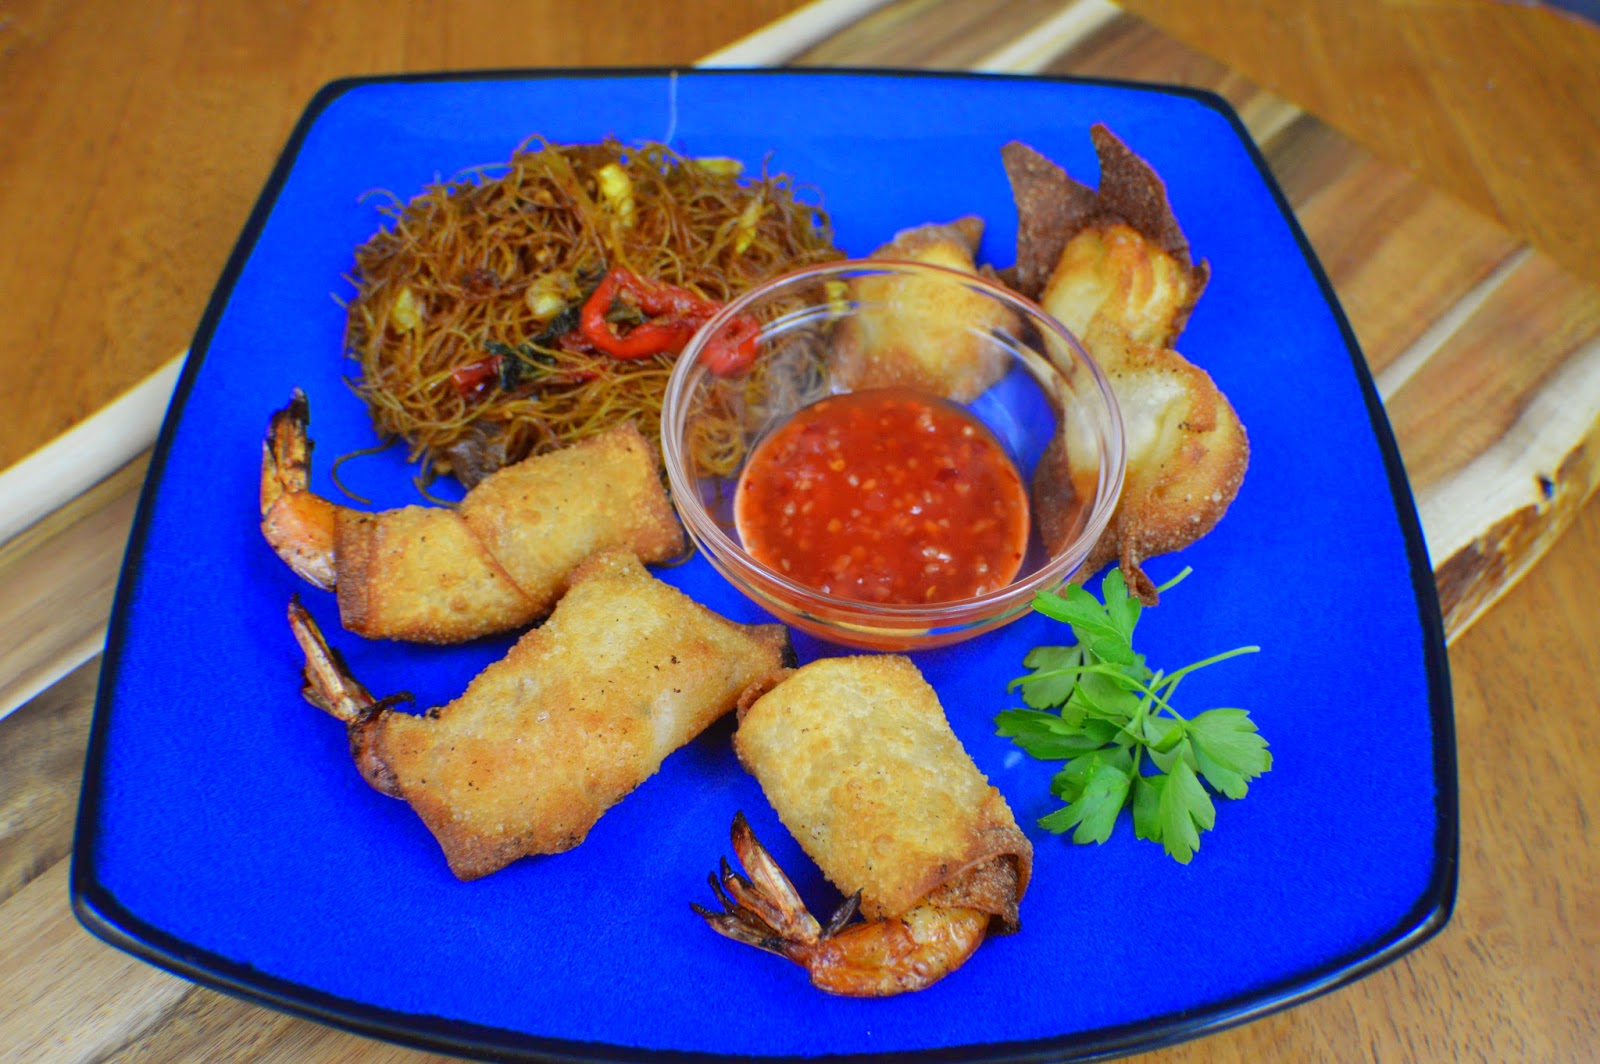 delicious meal with noodles, wontons and firecracker shrimp